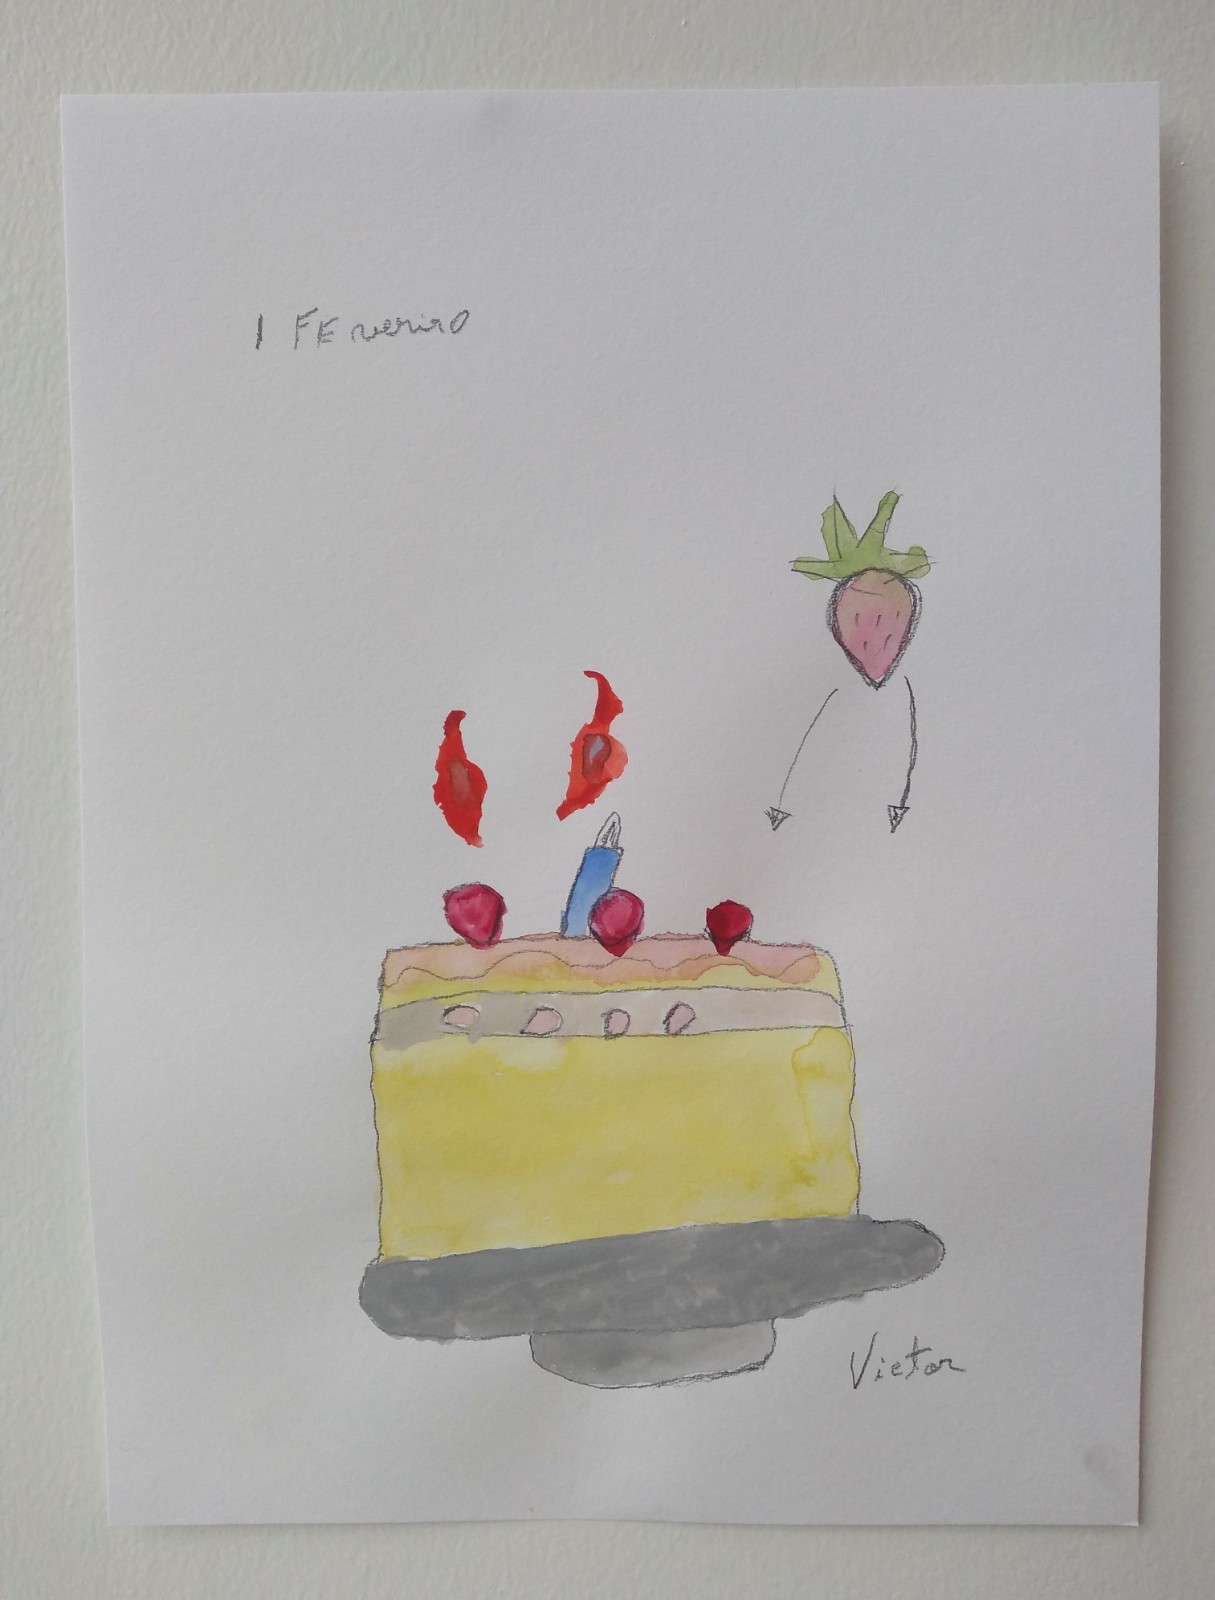 A yellow cake with read strawberries and lit candles on top.